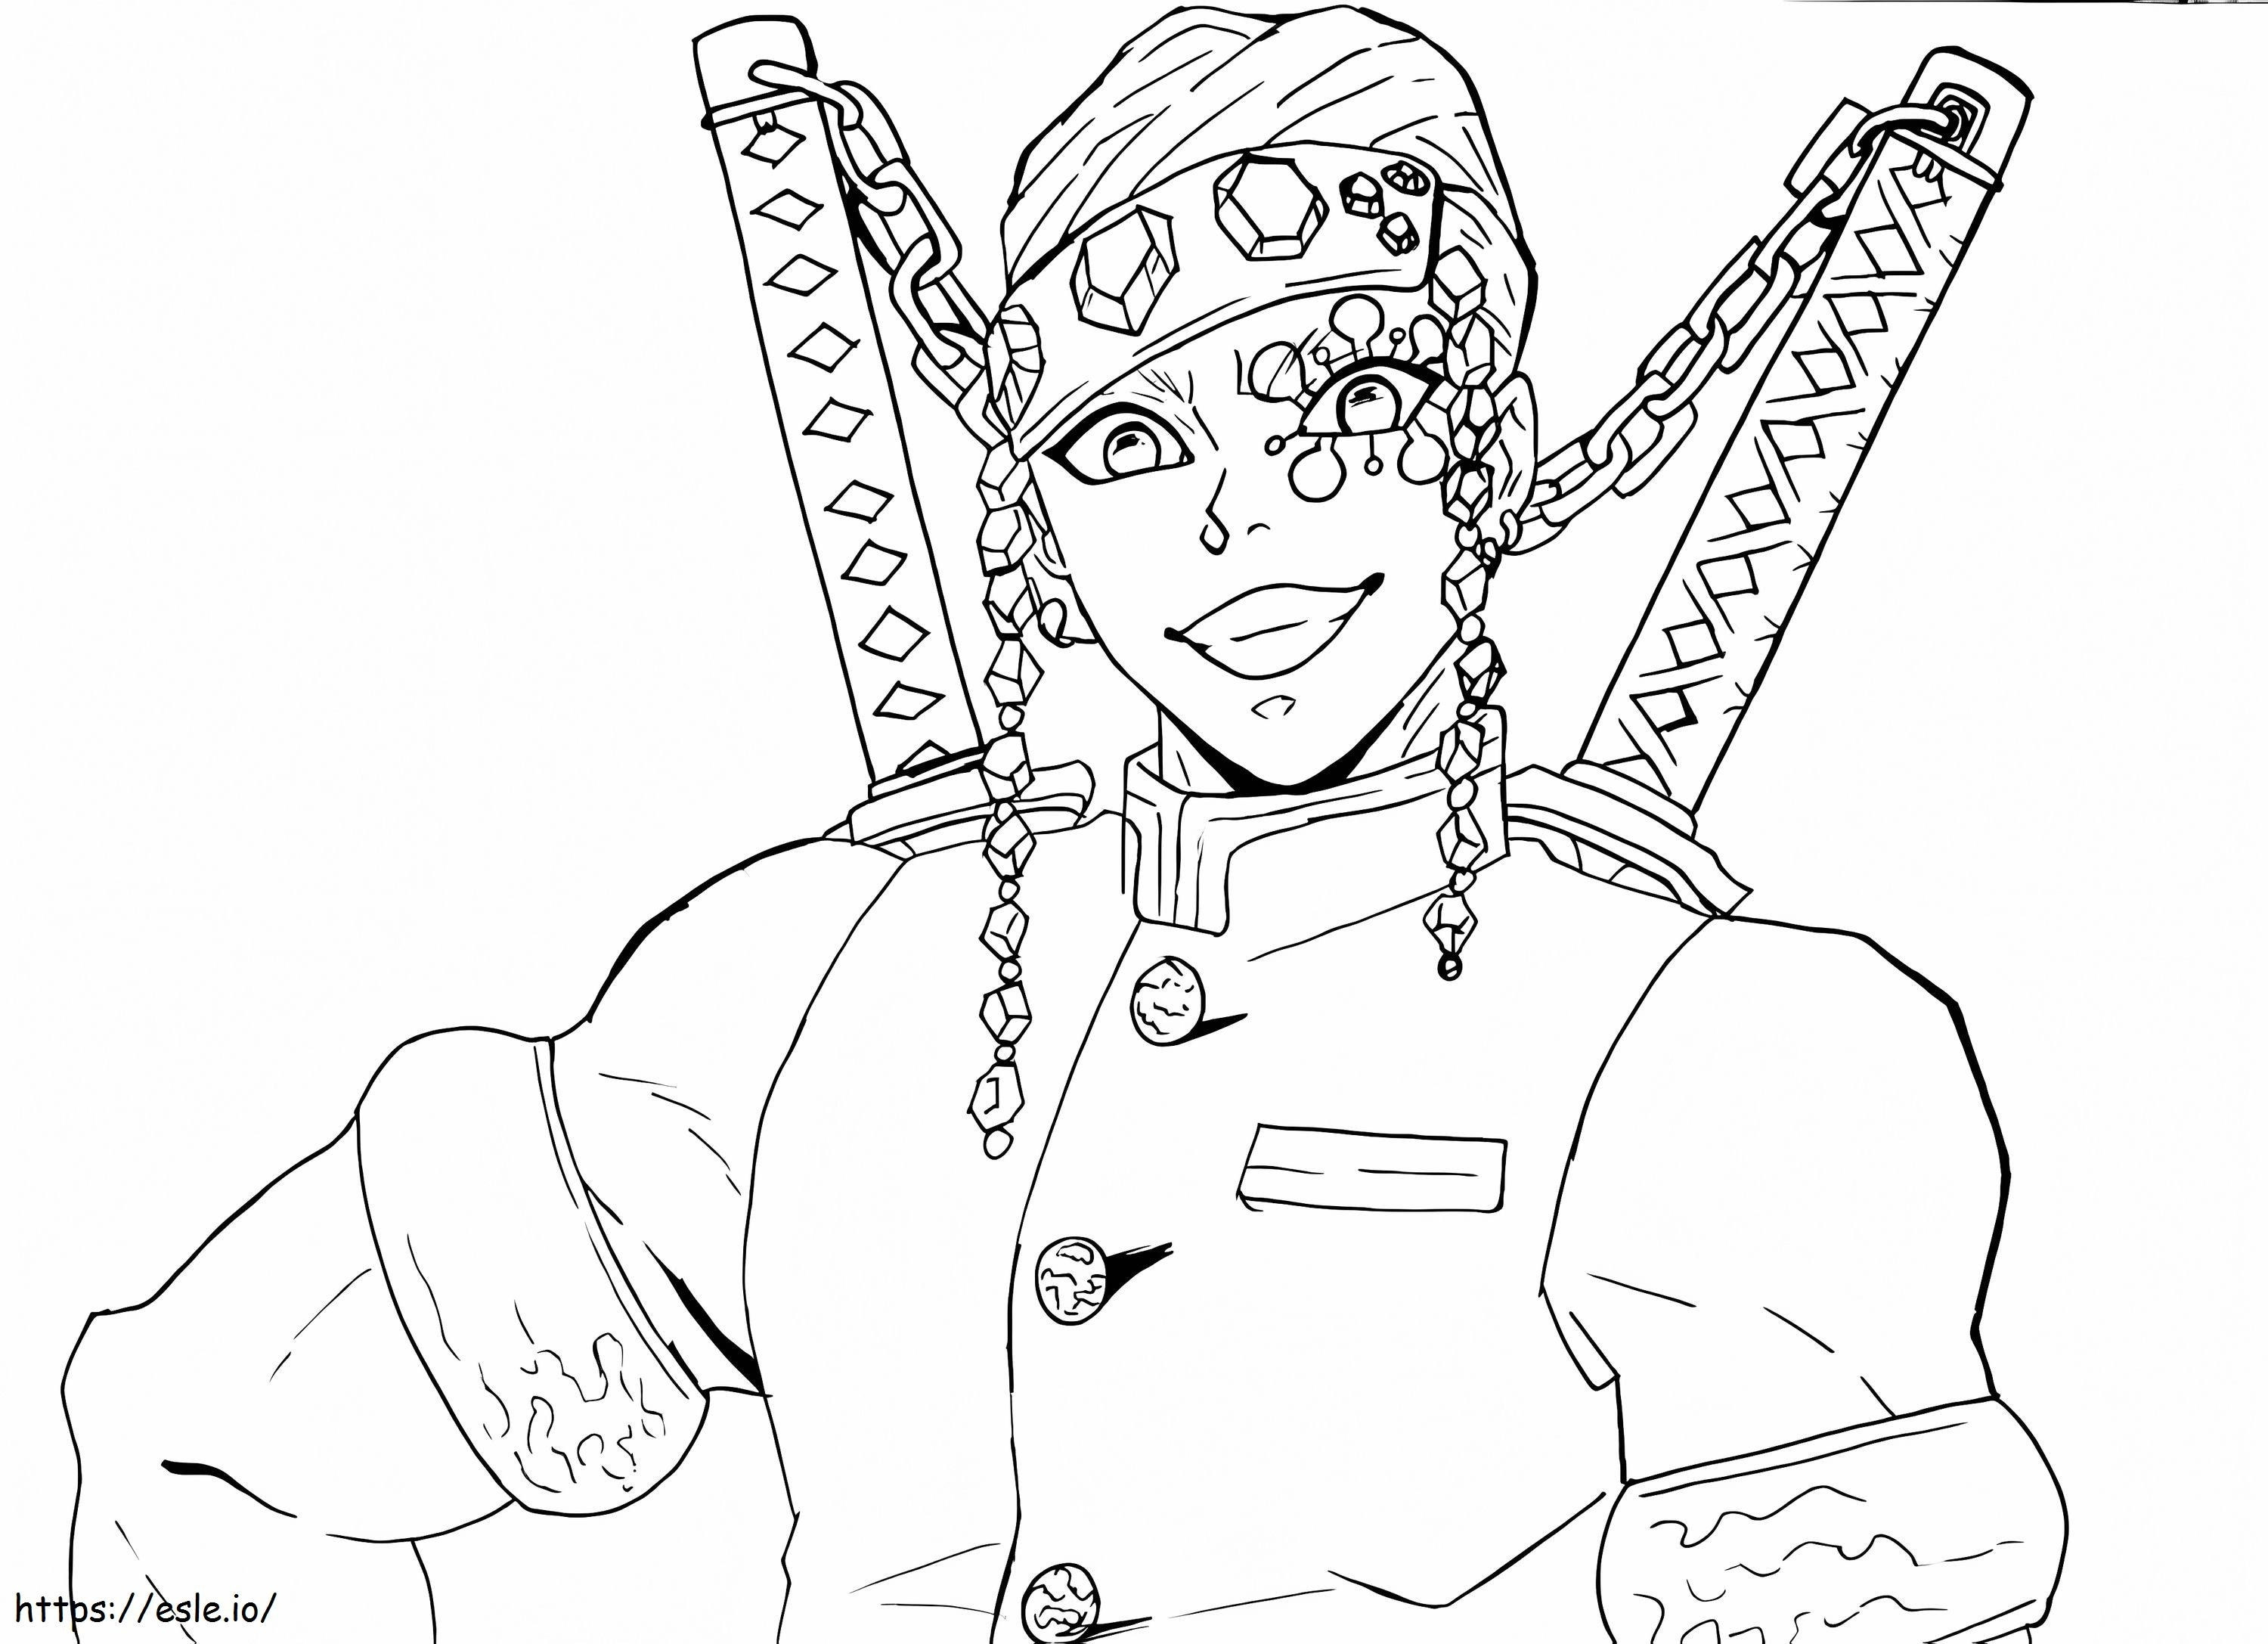 Friendly Right Uzui coloring page